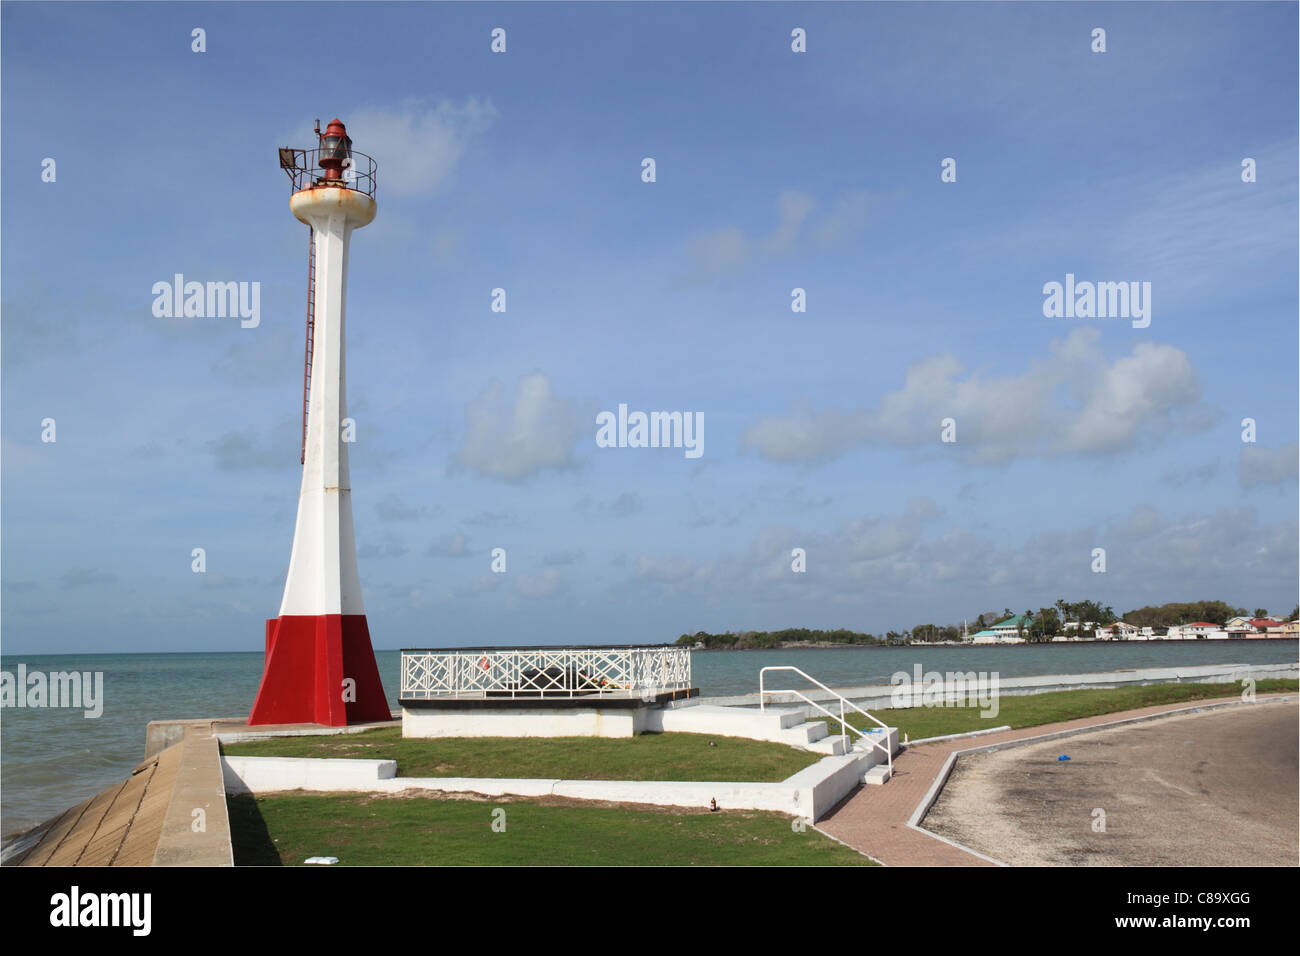 Fort George Lighthouse and Baron Bliss Memorial, Fort George, Belize City, Belize, Caribbean, Central America Stock Photo